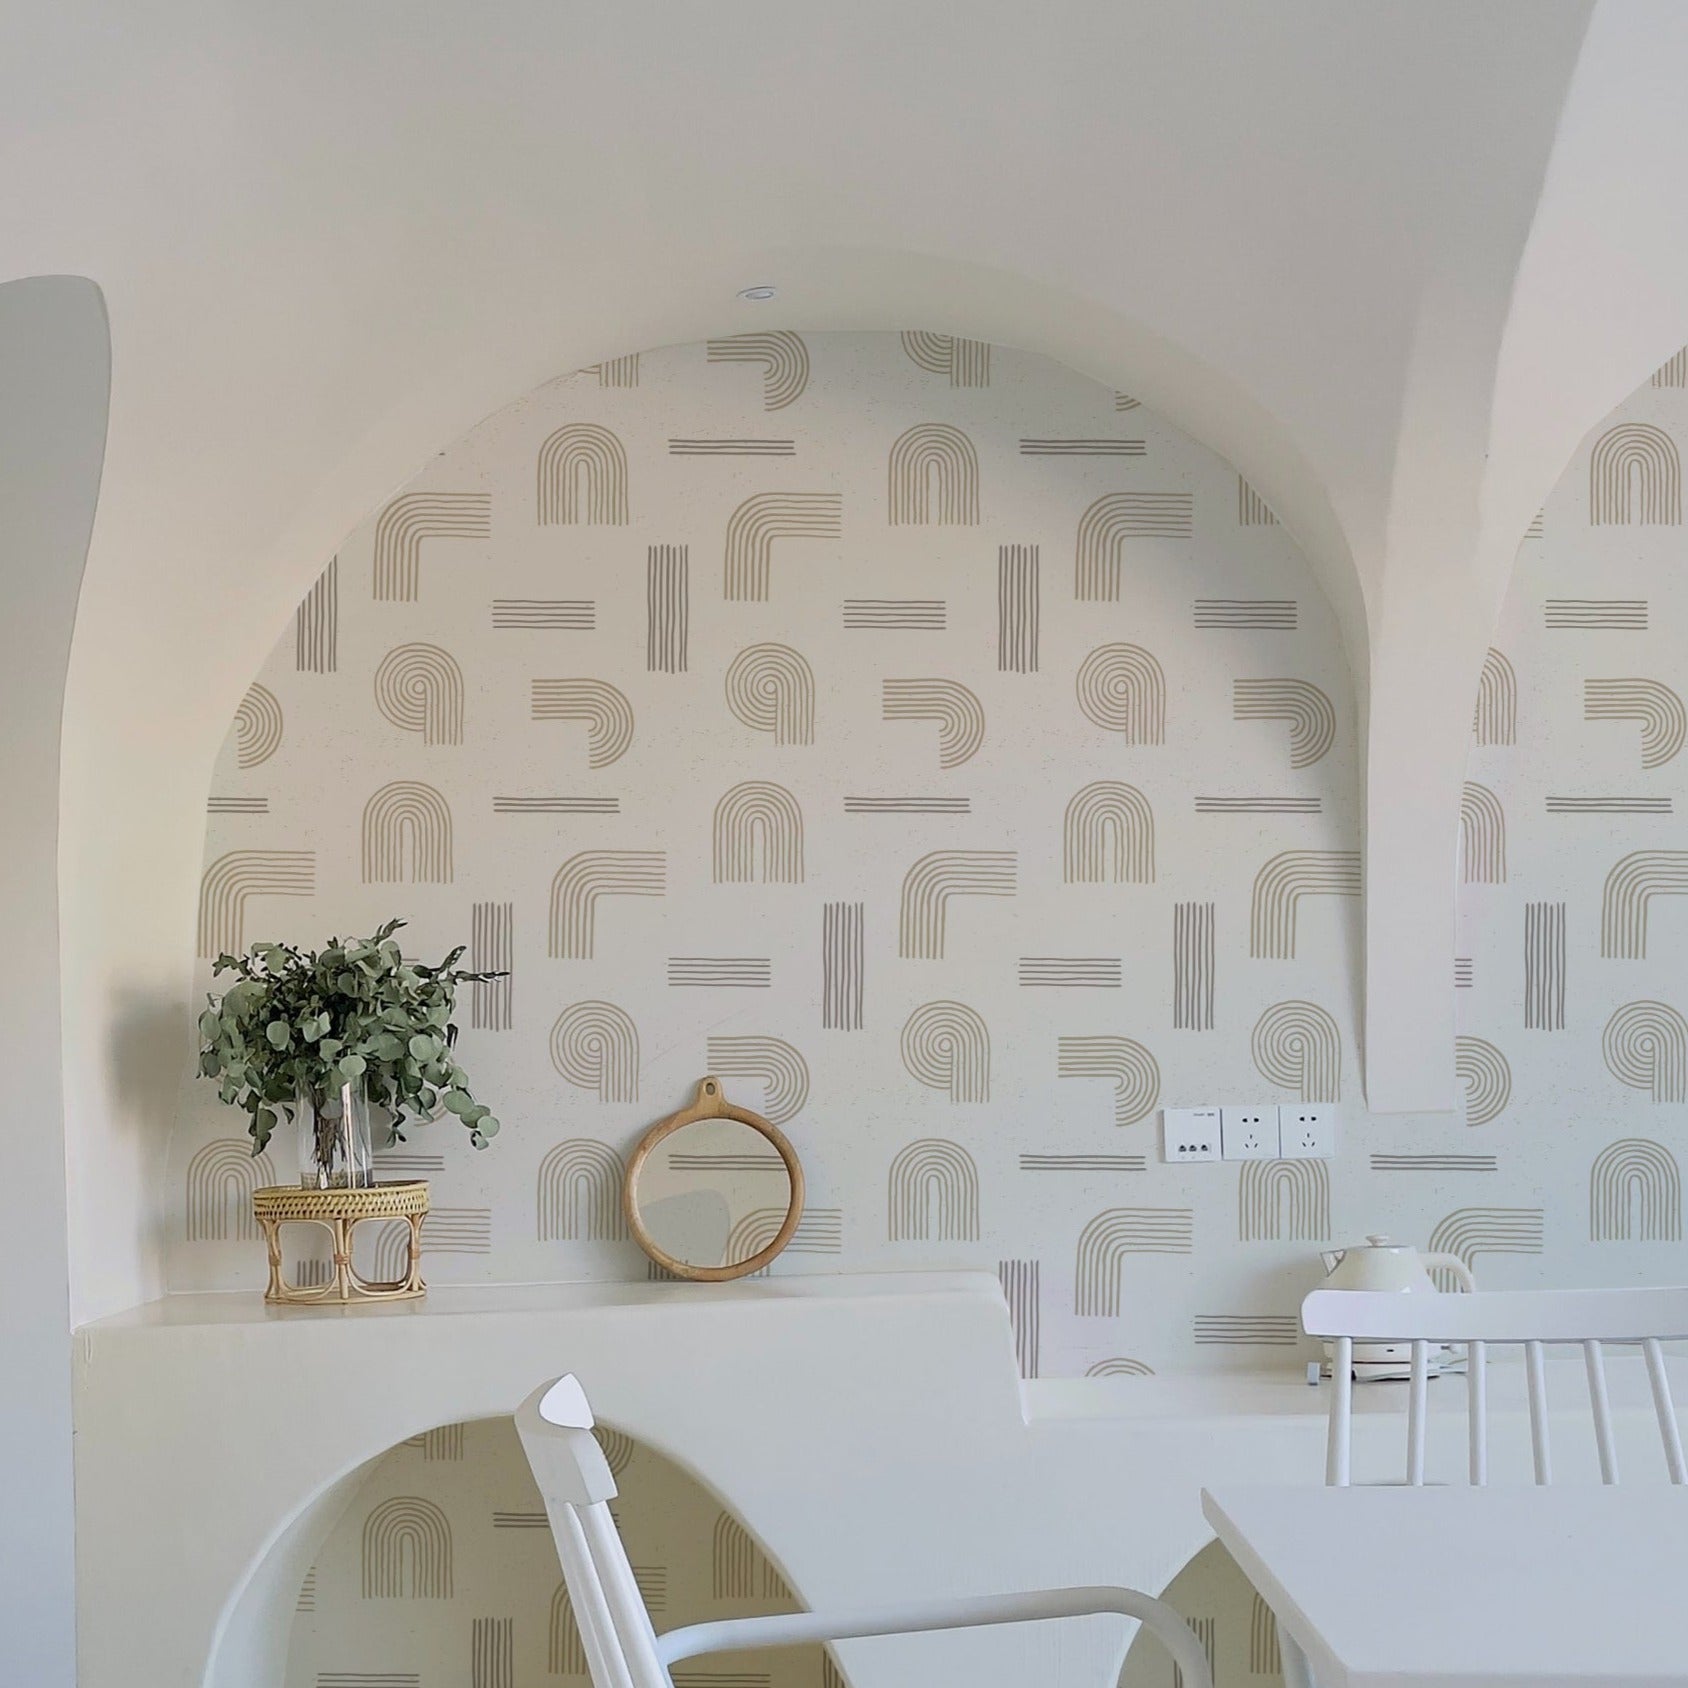 A bright and airy room decorated with Sand Zen Geometric Wallpaper - VII on the walls, complemented by white furnishings and natural wood accents. The space is styled with minimalist decor, including a white arch-shaped mirror and a small plant, creating a serene atmosphere.